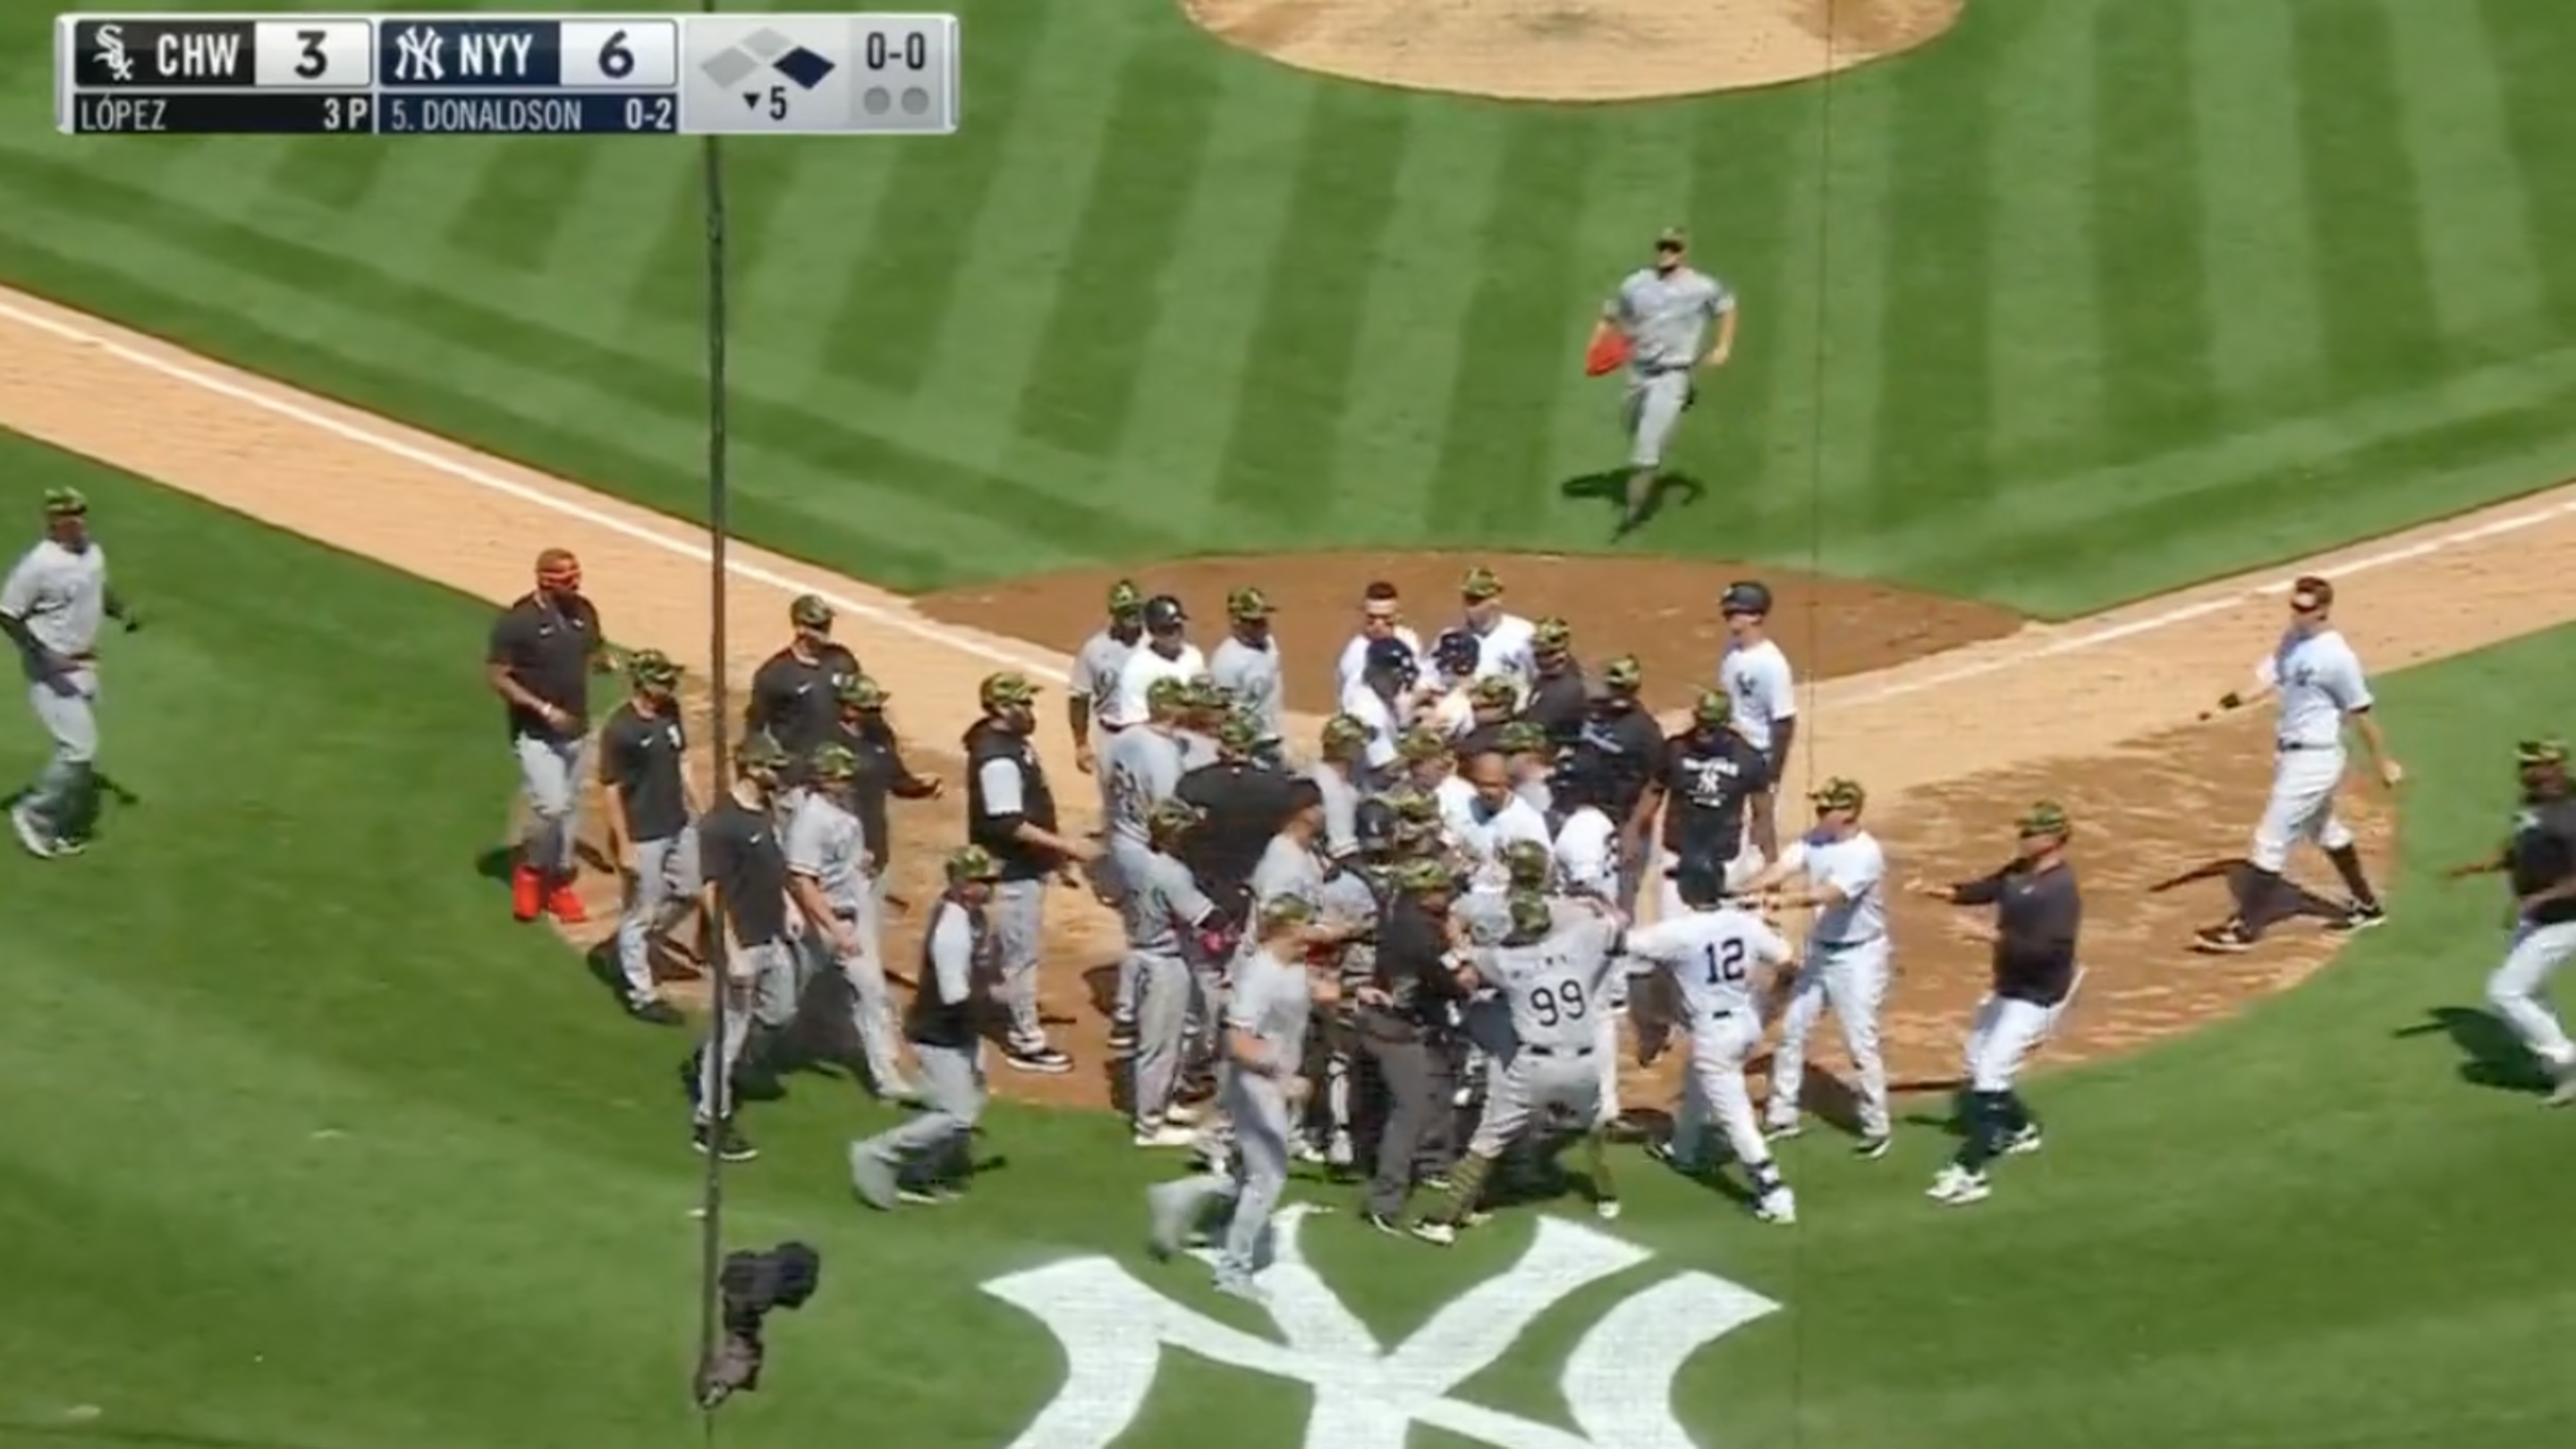 Tim Anderson-Josh Donaldson Feud Finally Boils Over in
Benches-Clearing Incident During White Sox-Yankees